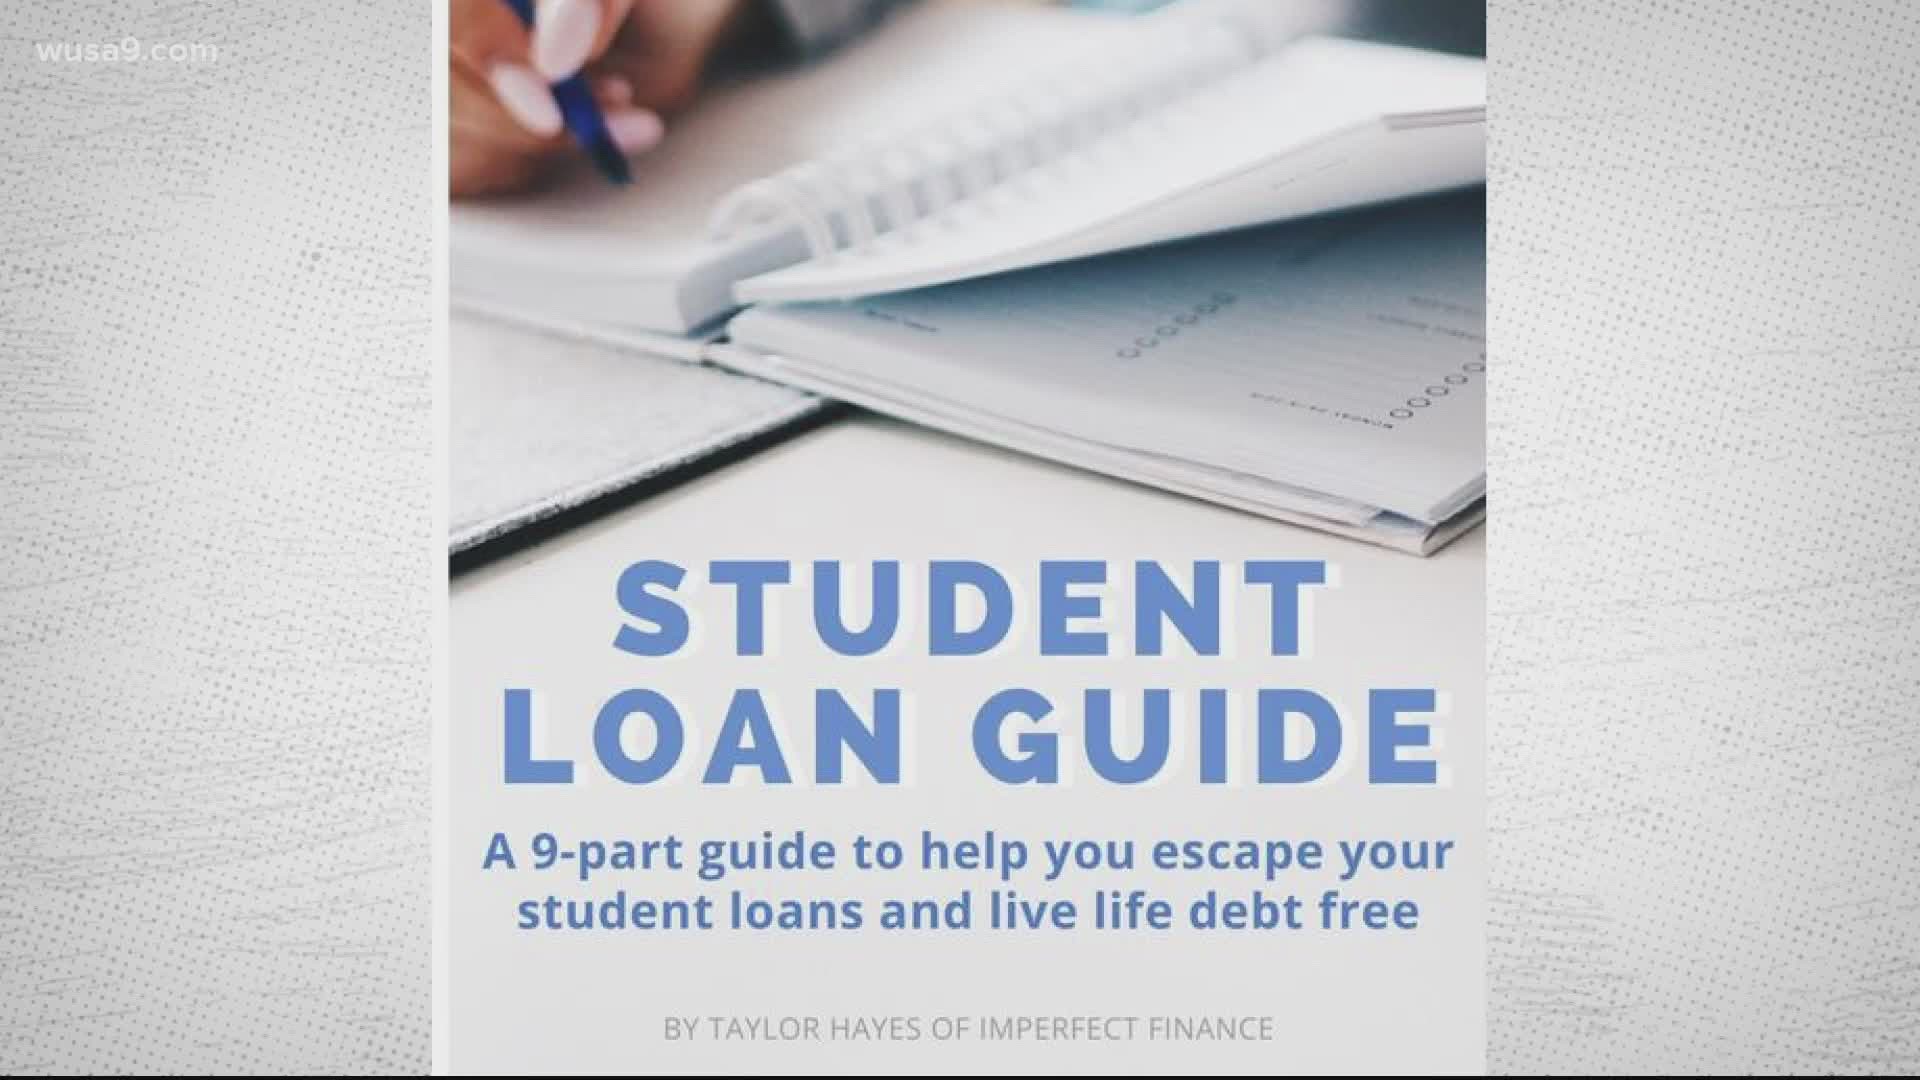 The thought of paying off student loans can be overwhelming. One former Fairfax County student created her own student loan guide to help graduates get started.